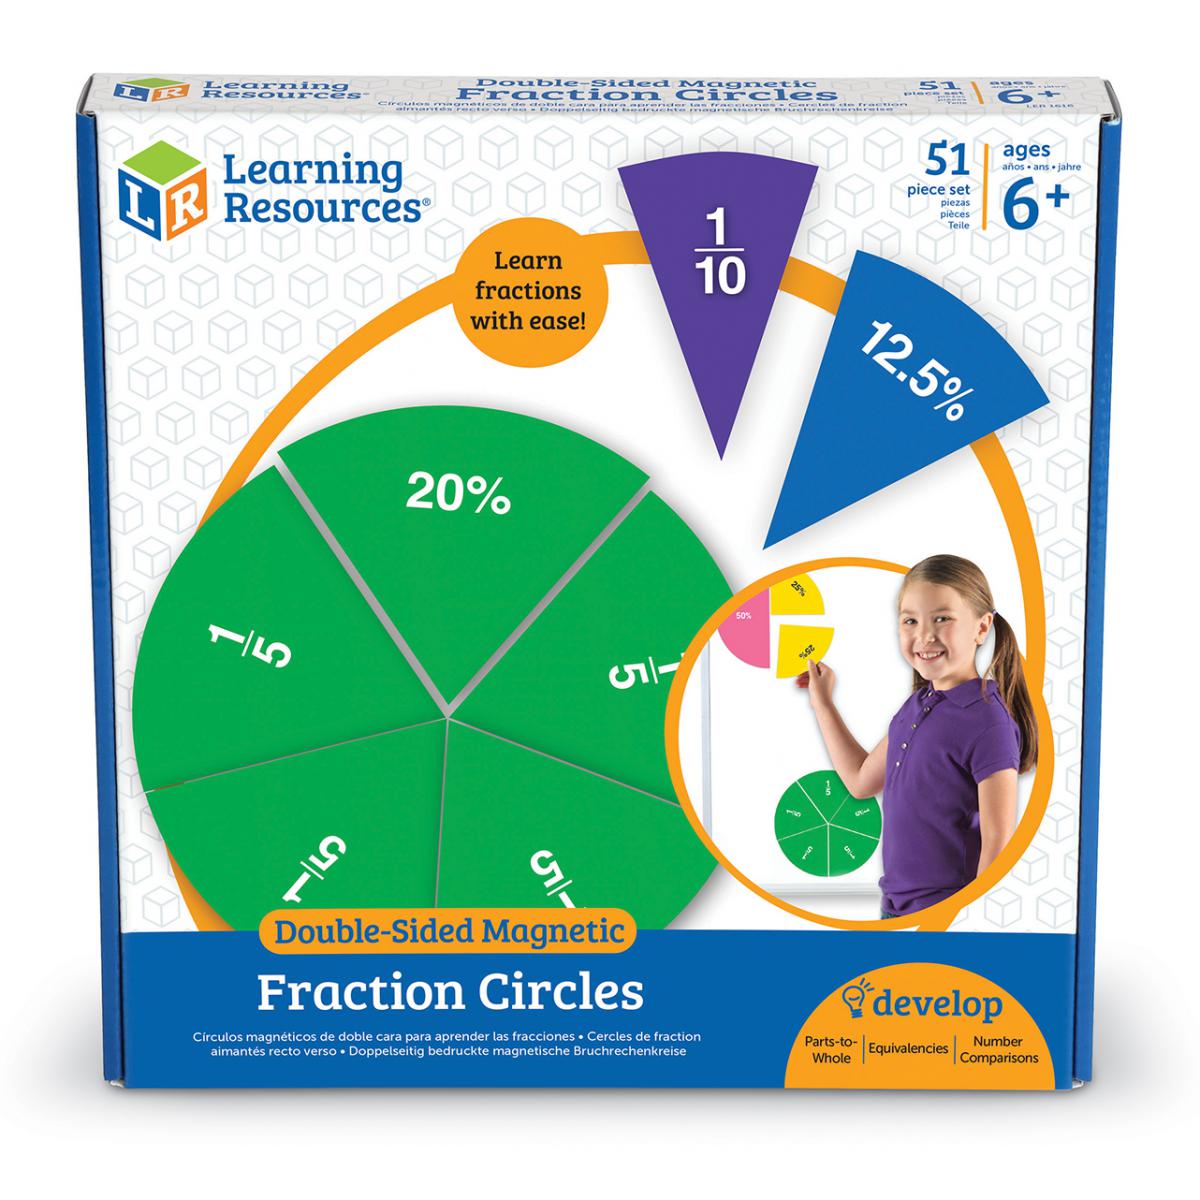  Double-Sided Magnetic Fraction Circles 